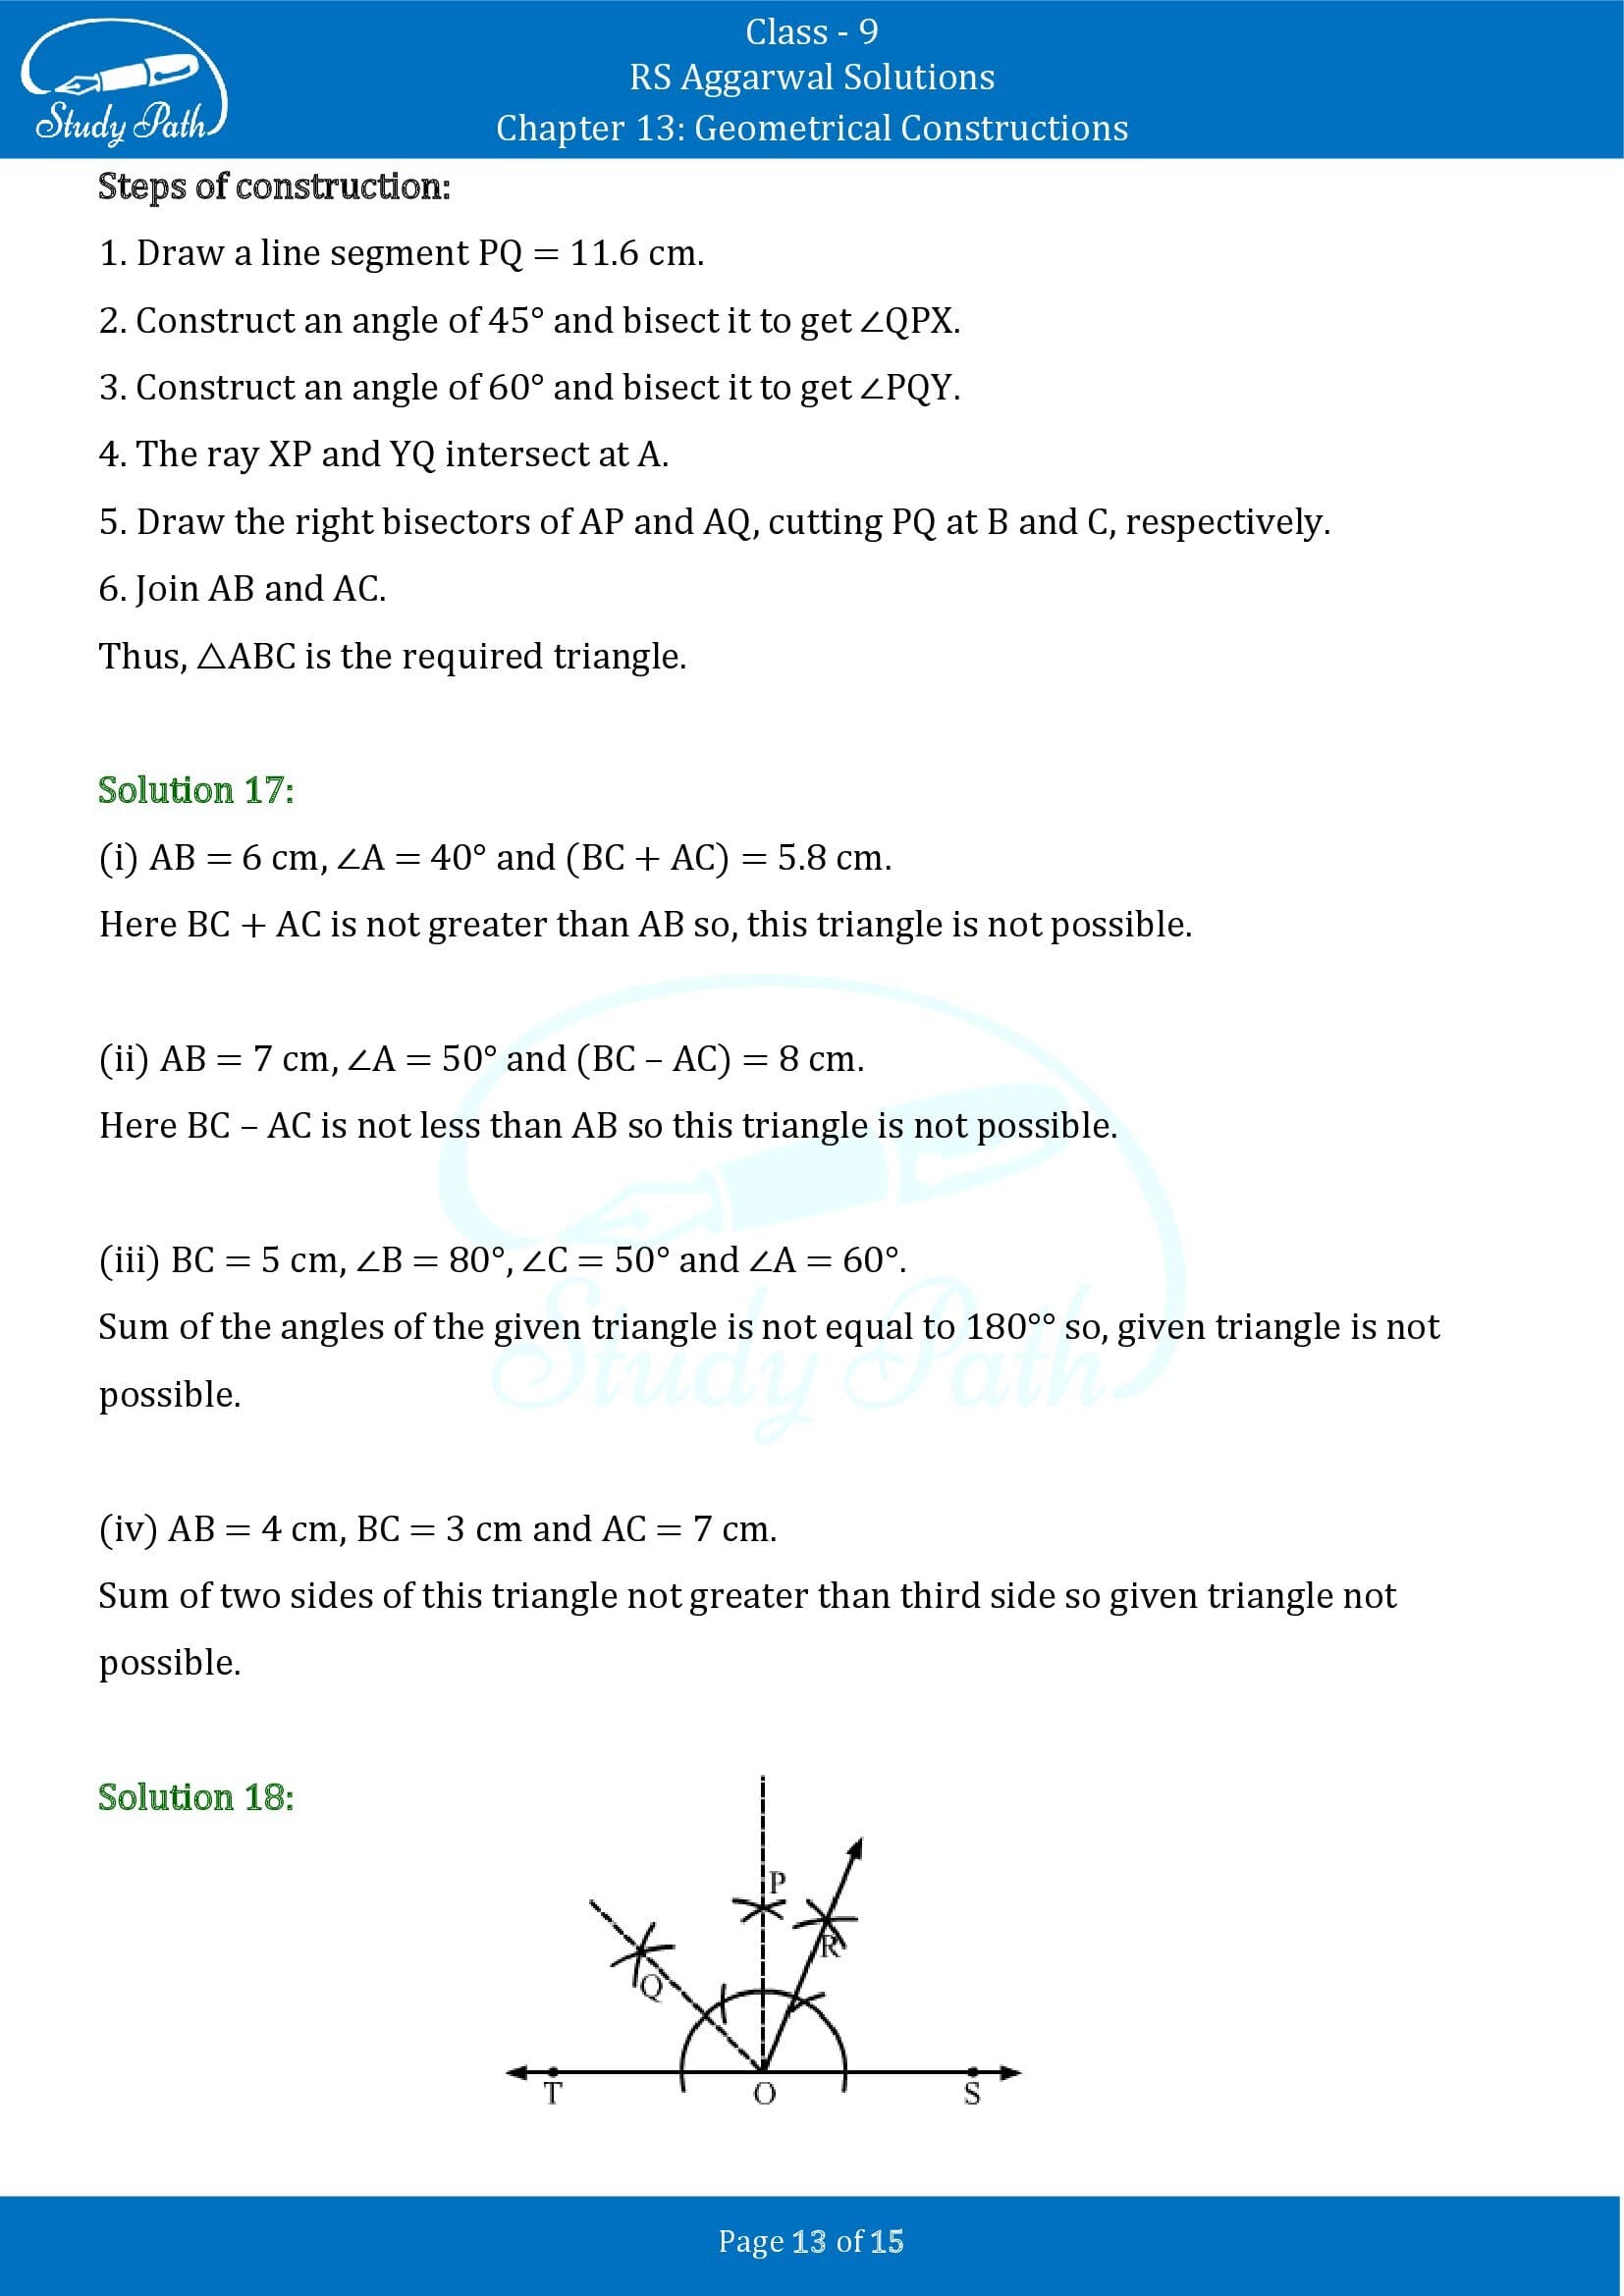 RS Aggarwal Solutions Class 9 Chapter 13 Geometrical Constructions 13